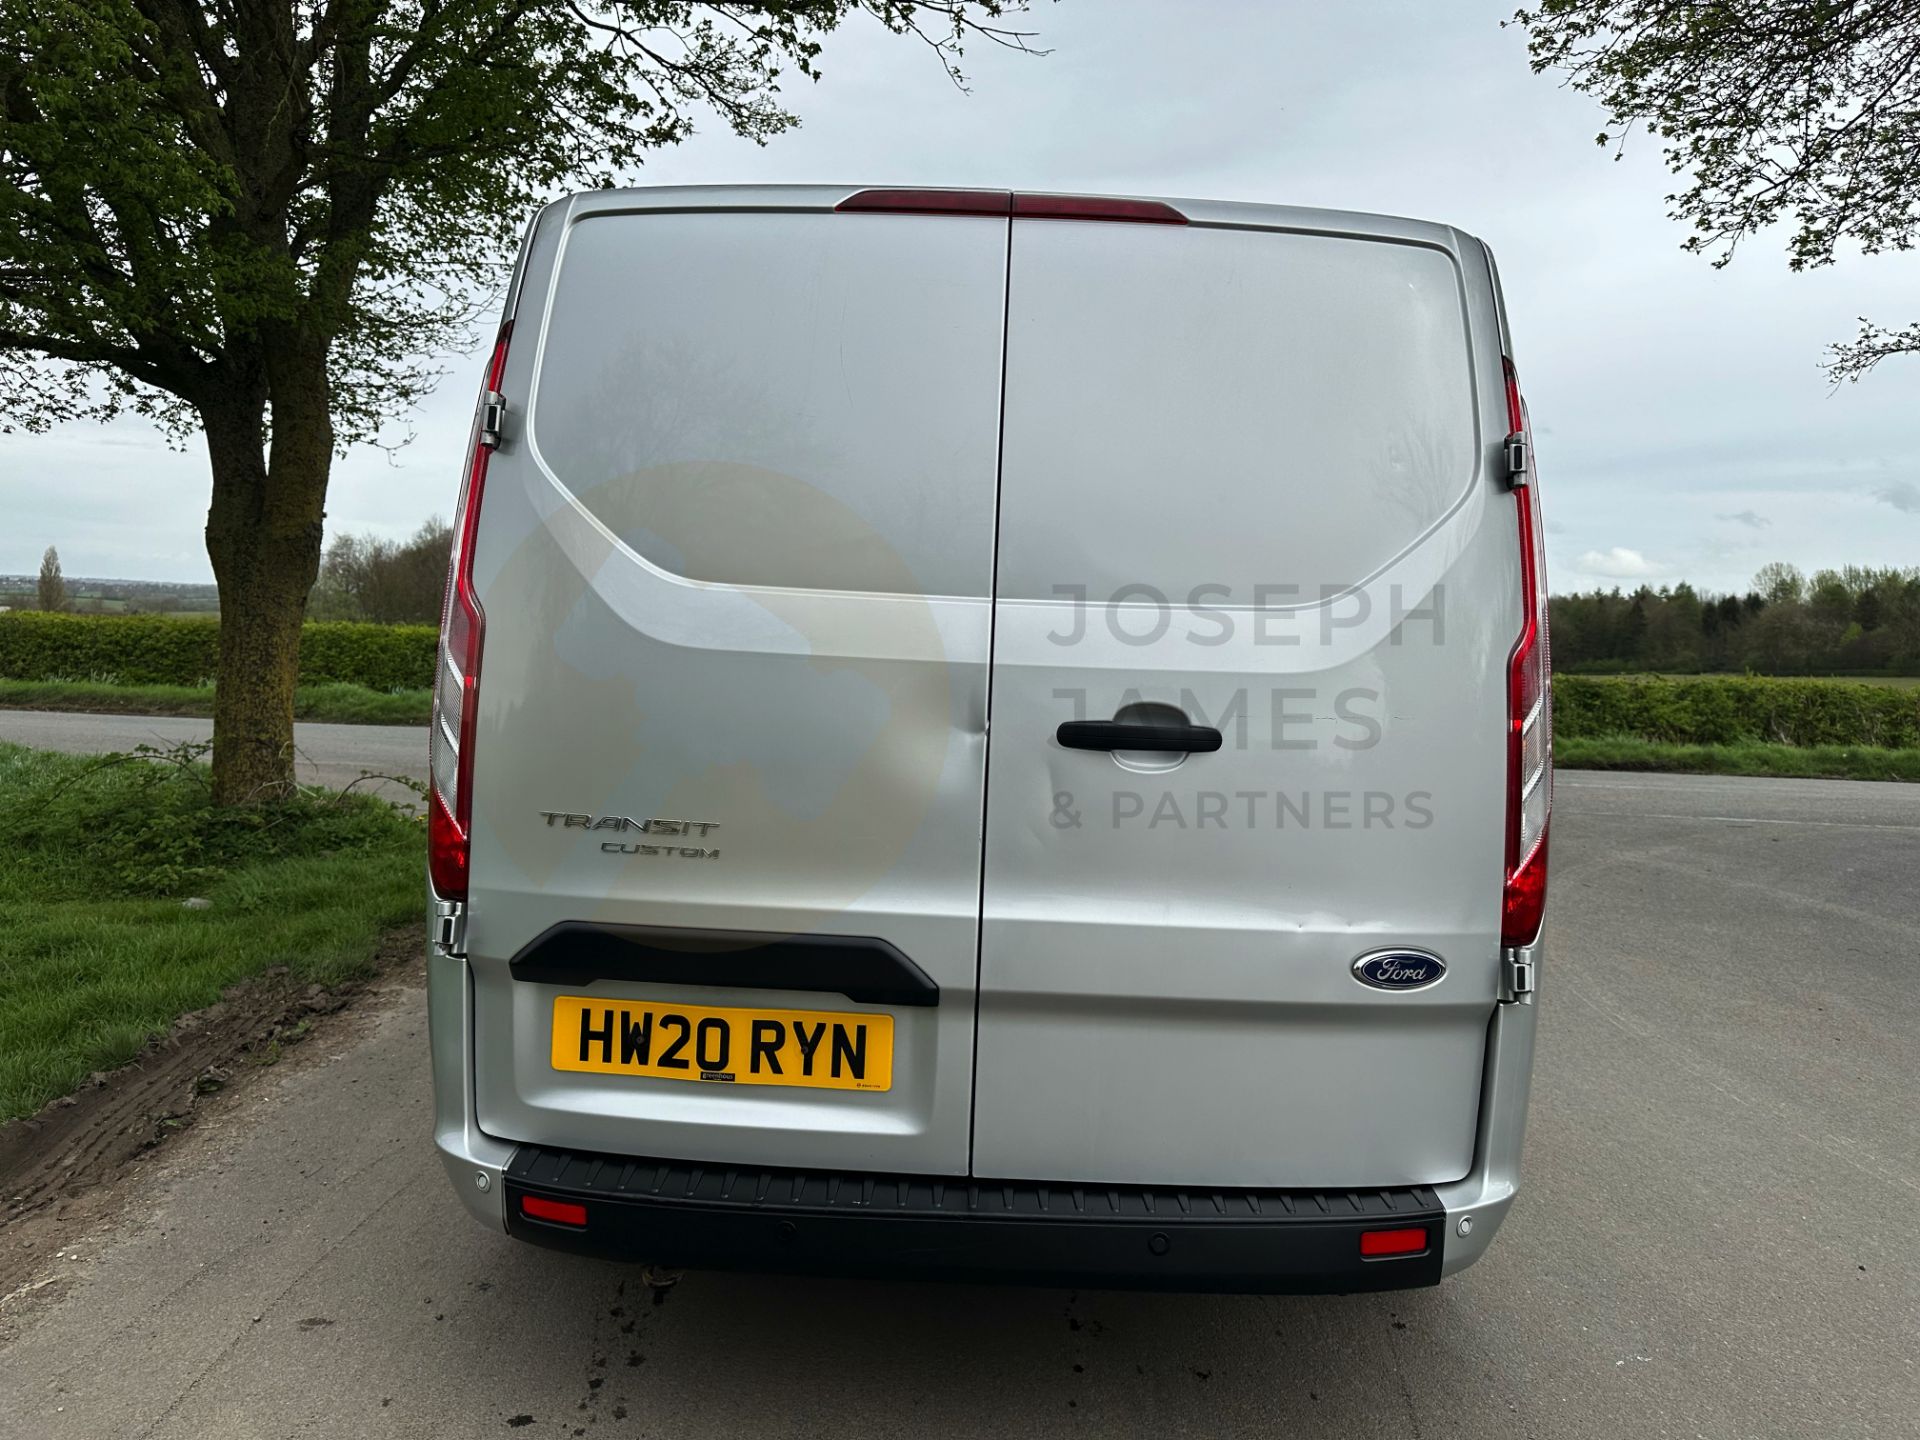 (ON SALE) FORD TRANSIT CUSTOM "TREND" 2.0TDCI (130) 20 REG -1 OWNER- SILVER -GREAT SPEC -LOW MILEAGE - Image 11 of 38